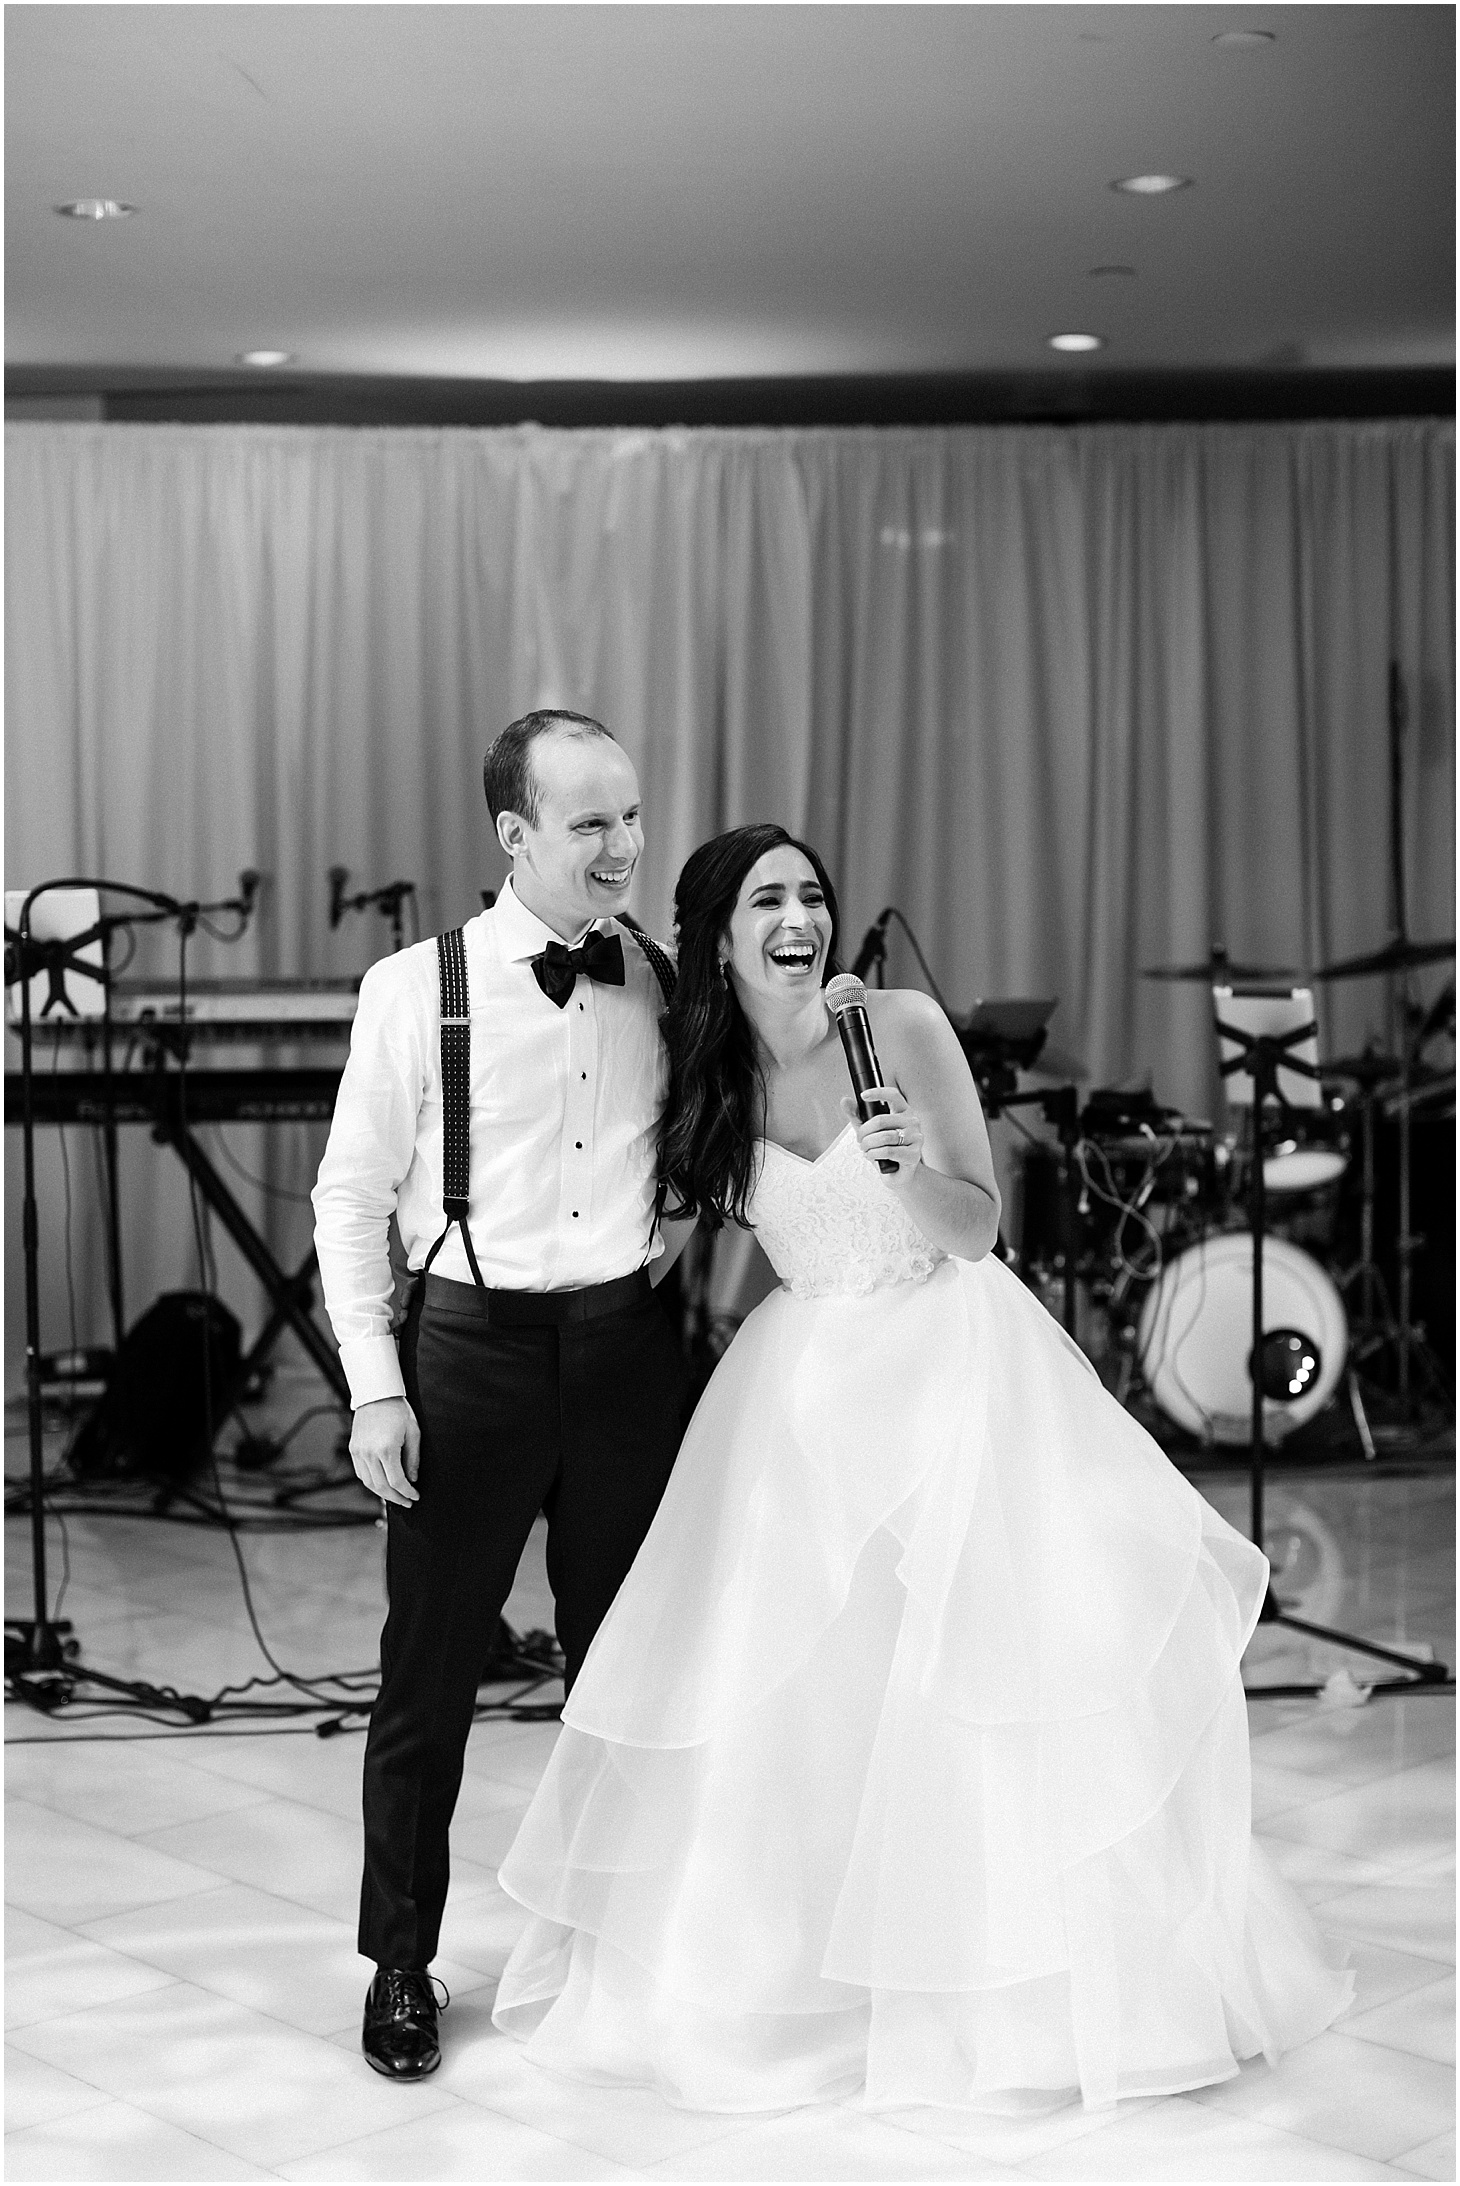 Wedding Reception at National Museum of Women in the Arts, Museum-Inspired Spring Wedding in Washington DC, Sarah Bradshaw Photography, DC Wedding Photographer